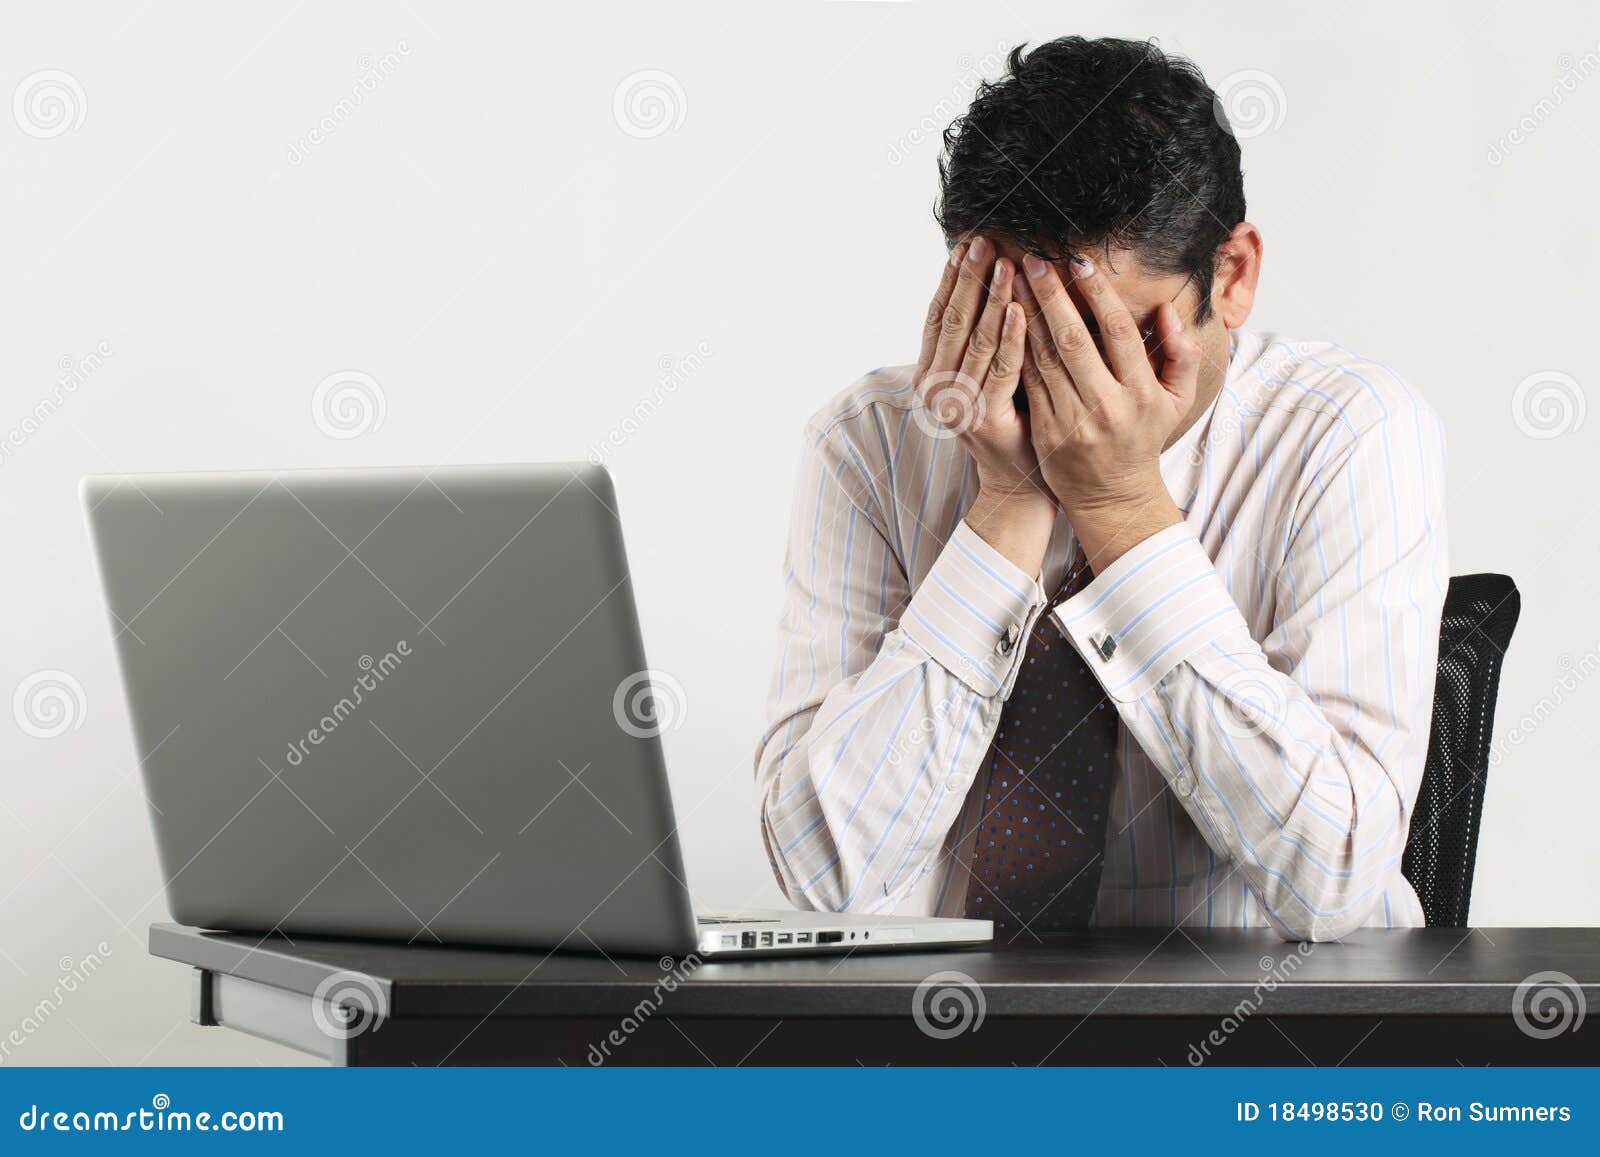 Bad day at the office stock photo. Image of professional - 18498530